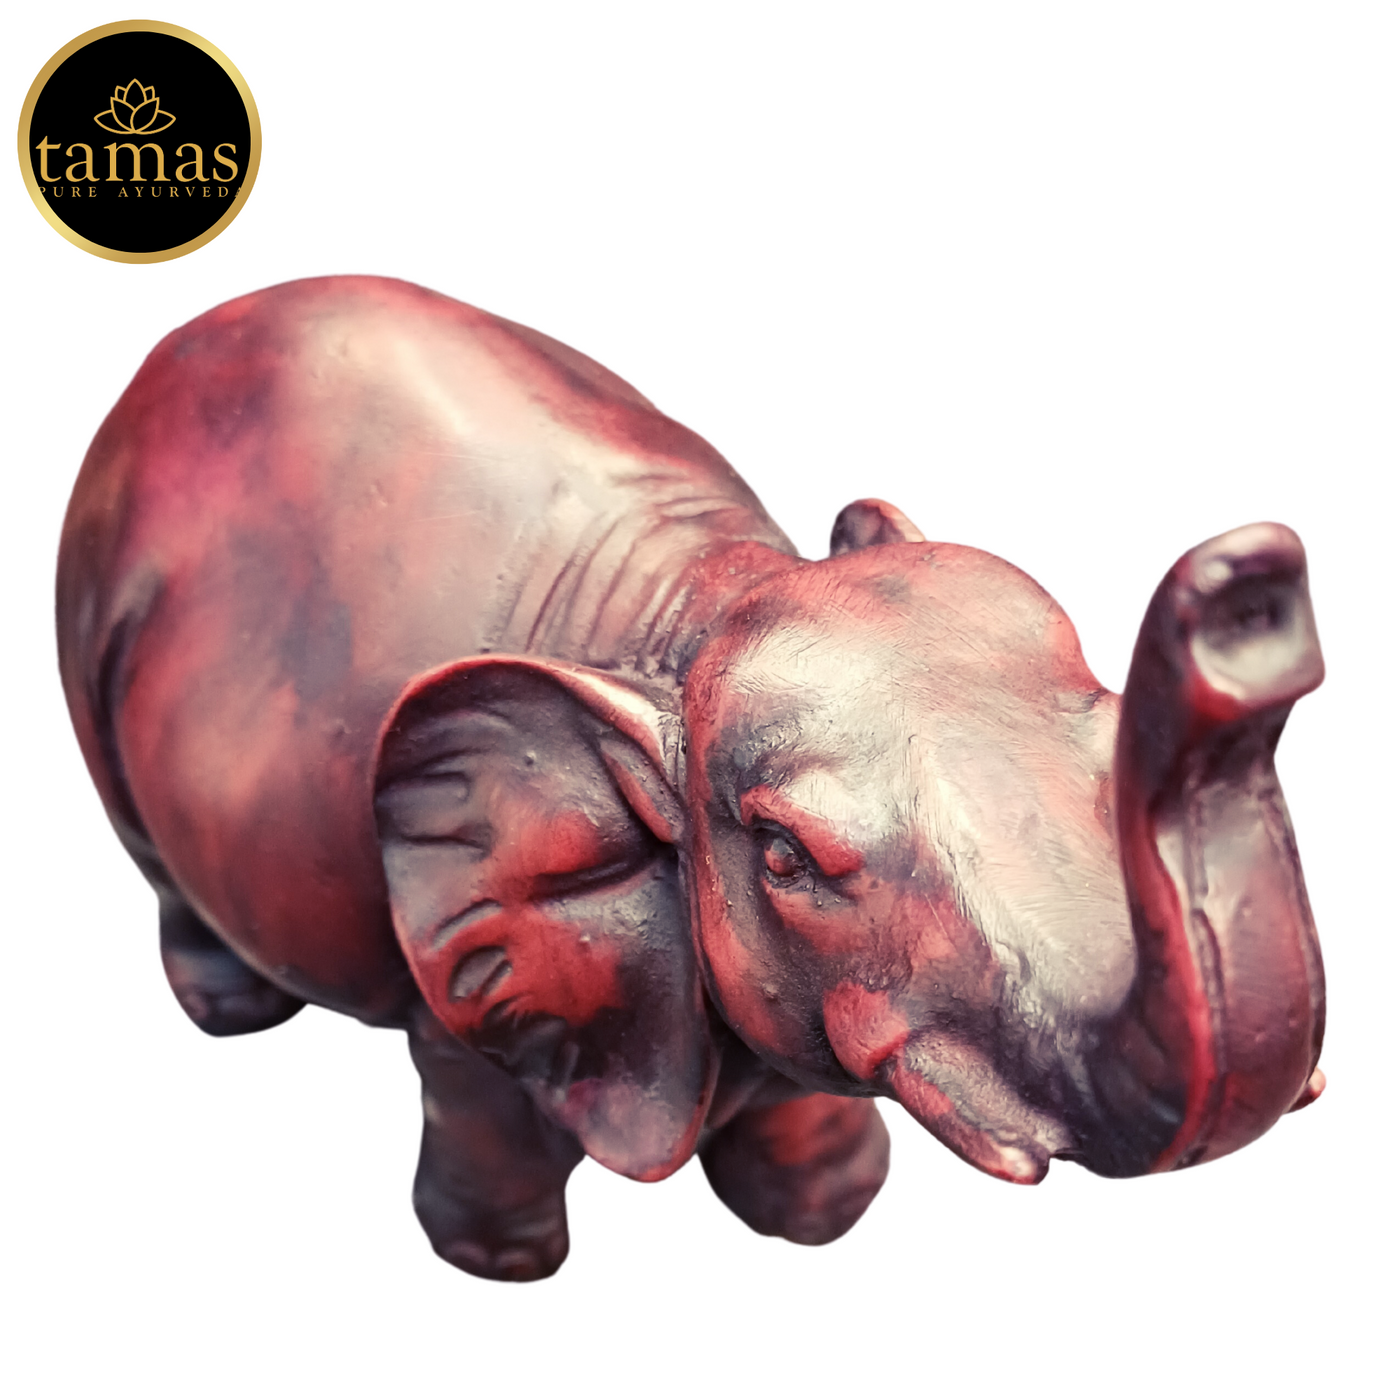 Tamas Elephant Poly Resin Statue (6 Inches)